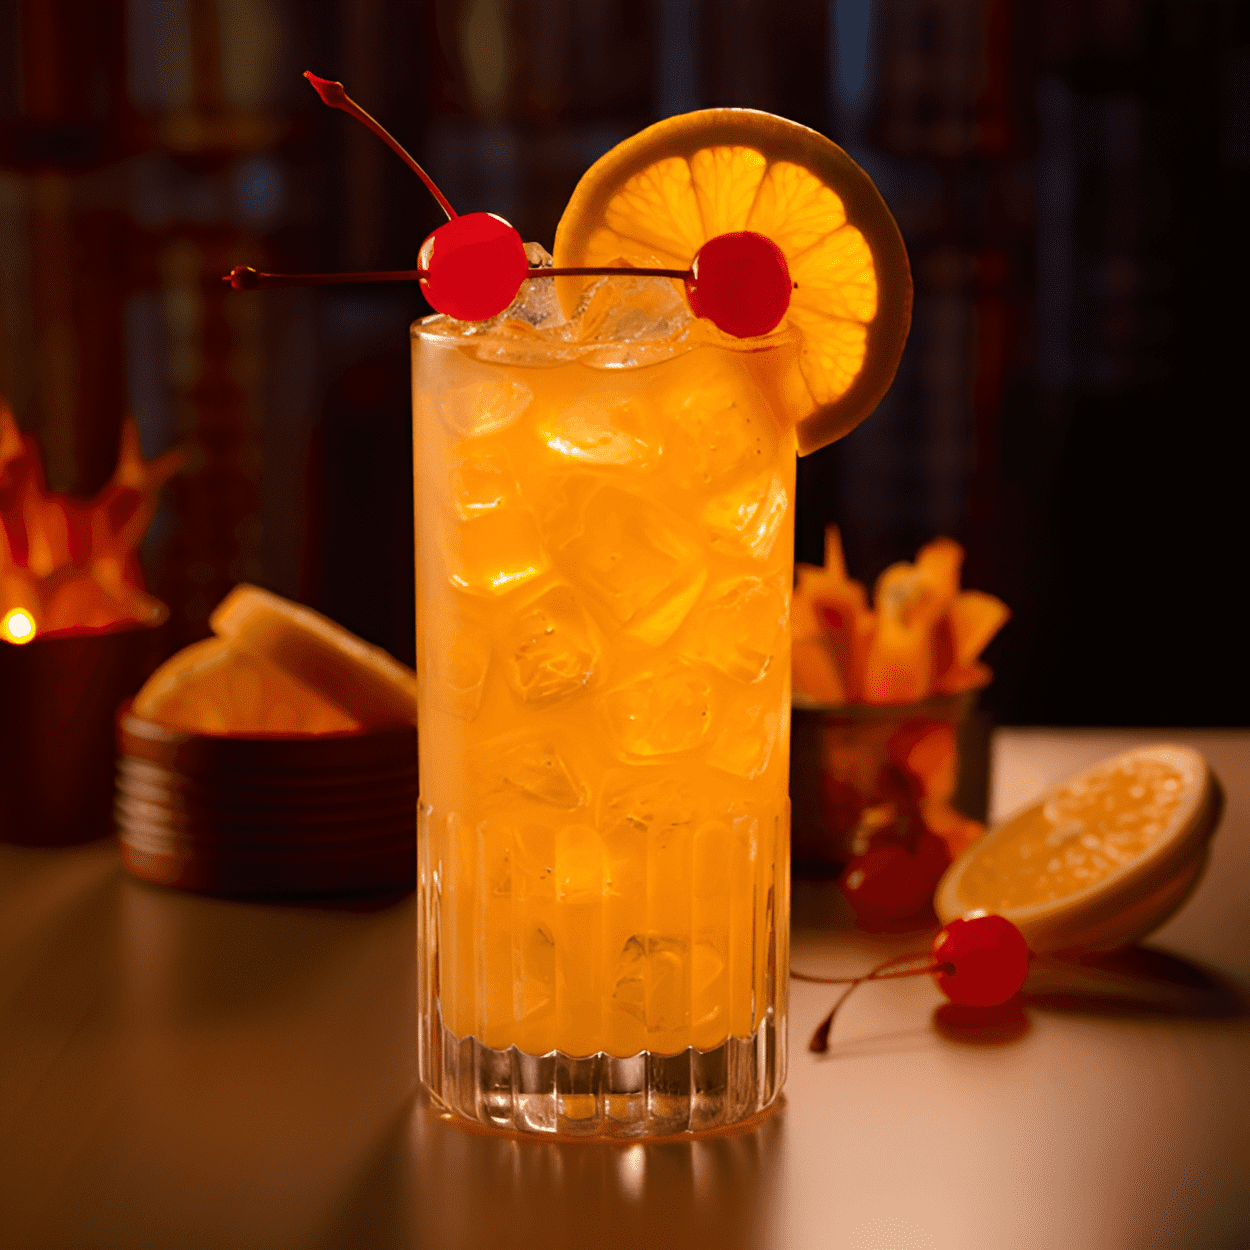 Outback Castaway Cocktail Recipe - The Outback Castaway is a sweet, fruity cocktail with a hint of tartness. The pineapple and orange juices give it a tropical flavor, while the rum adds a nice kick. The grenadine adds a touch of sweetness, making it a well-balanced and refreshing drink.